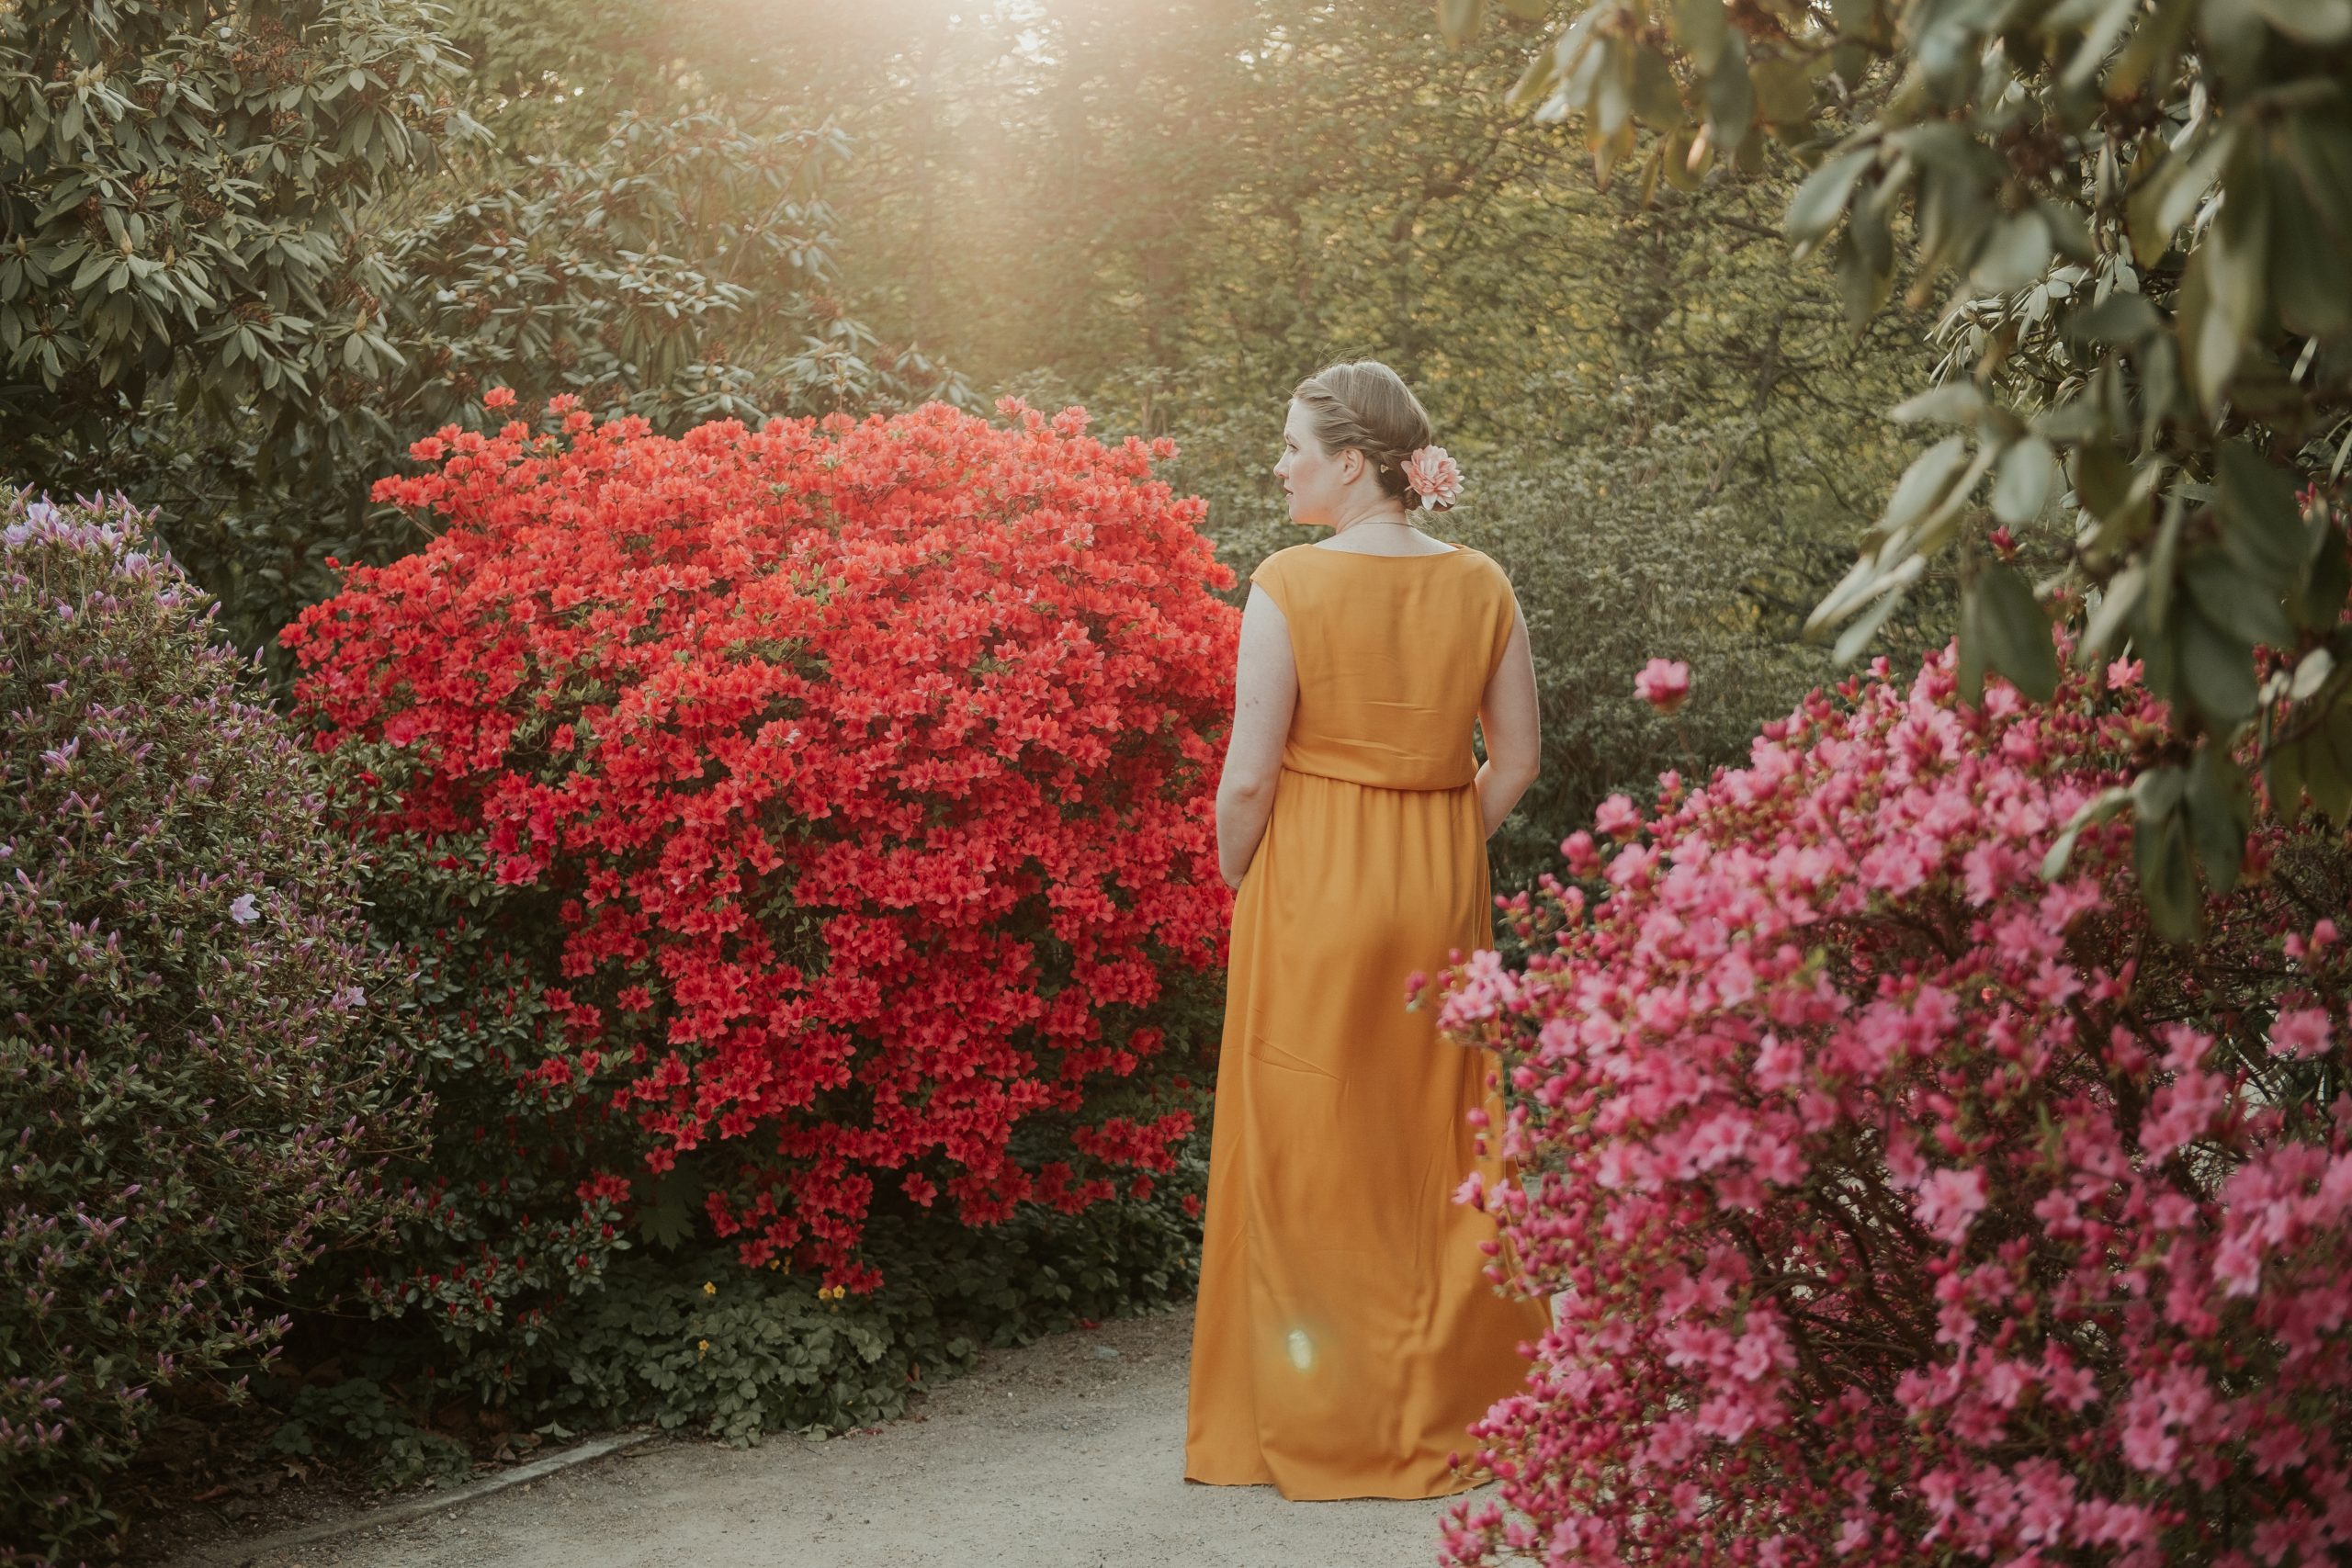 Anna photographed in the gardens by Studio Coralia